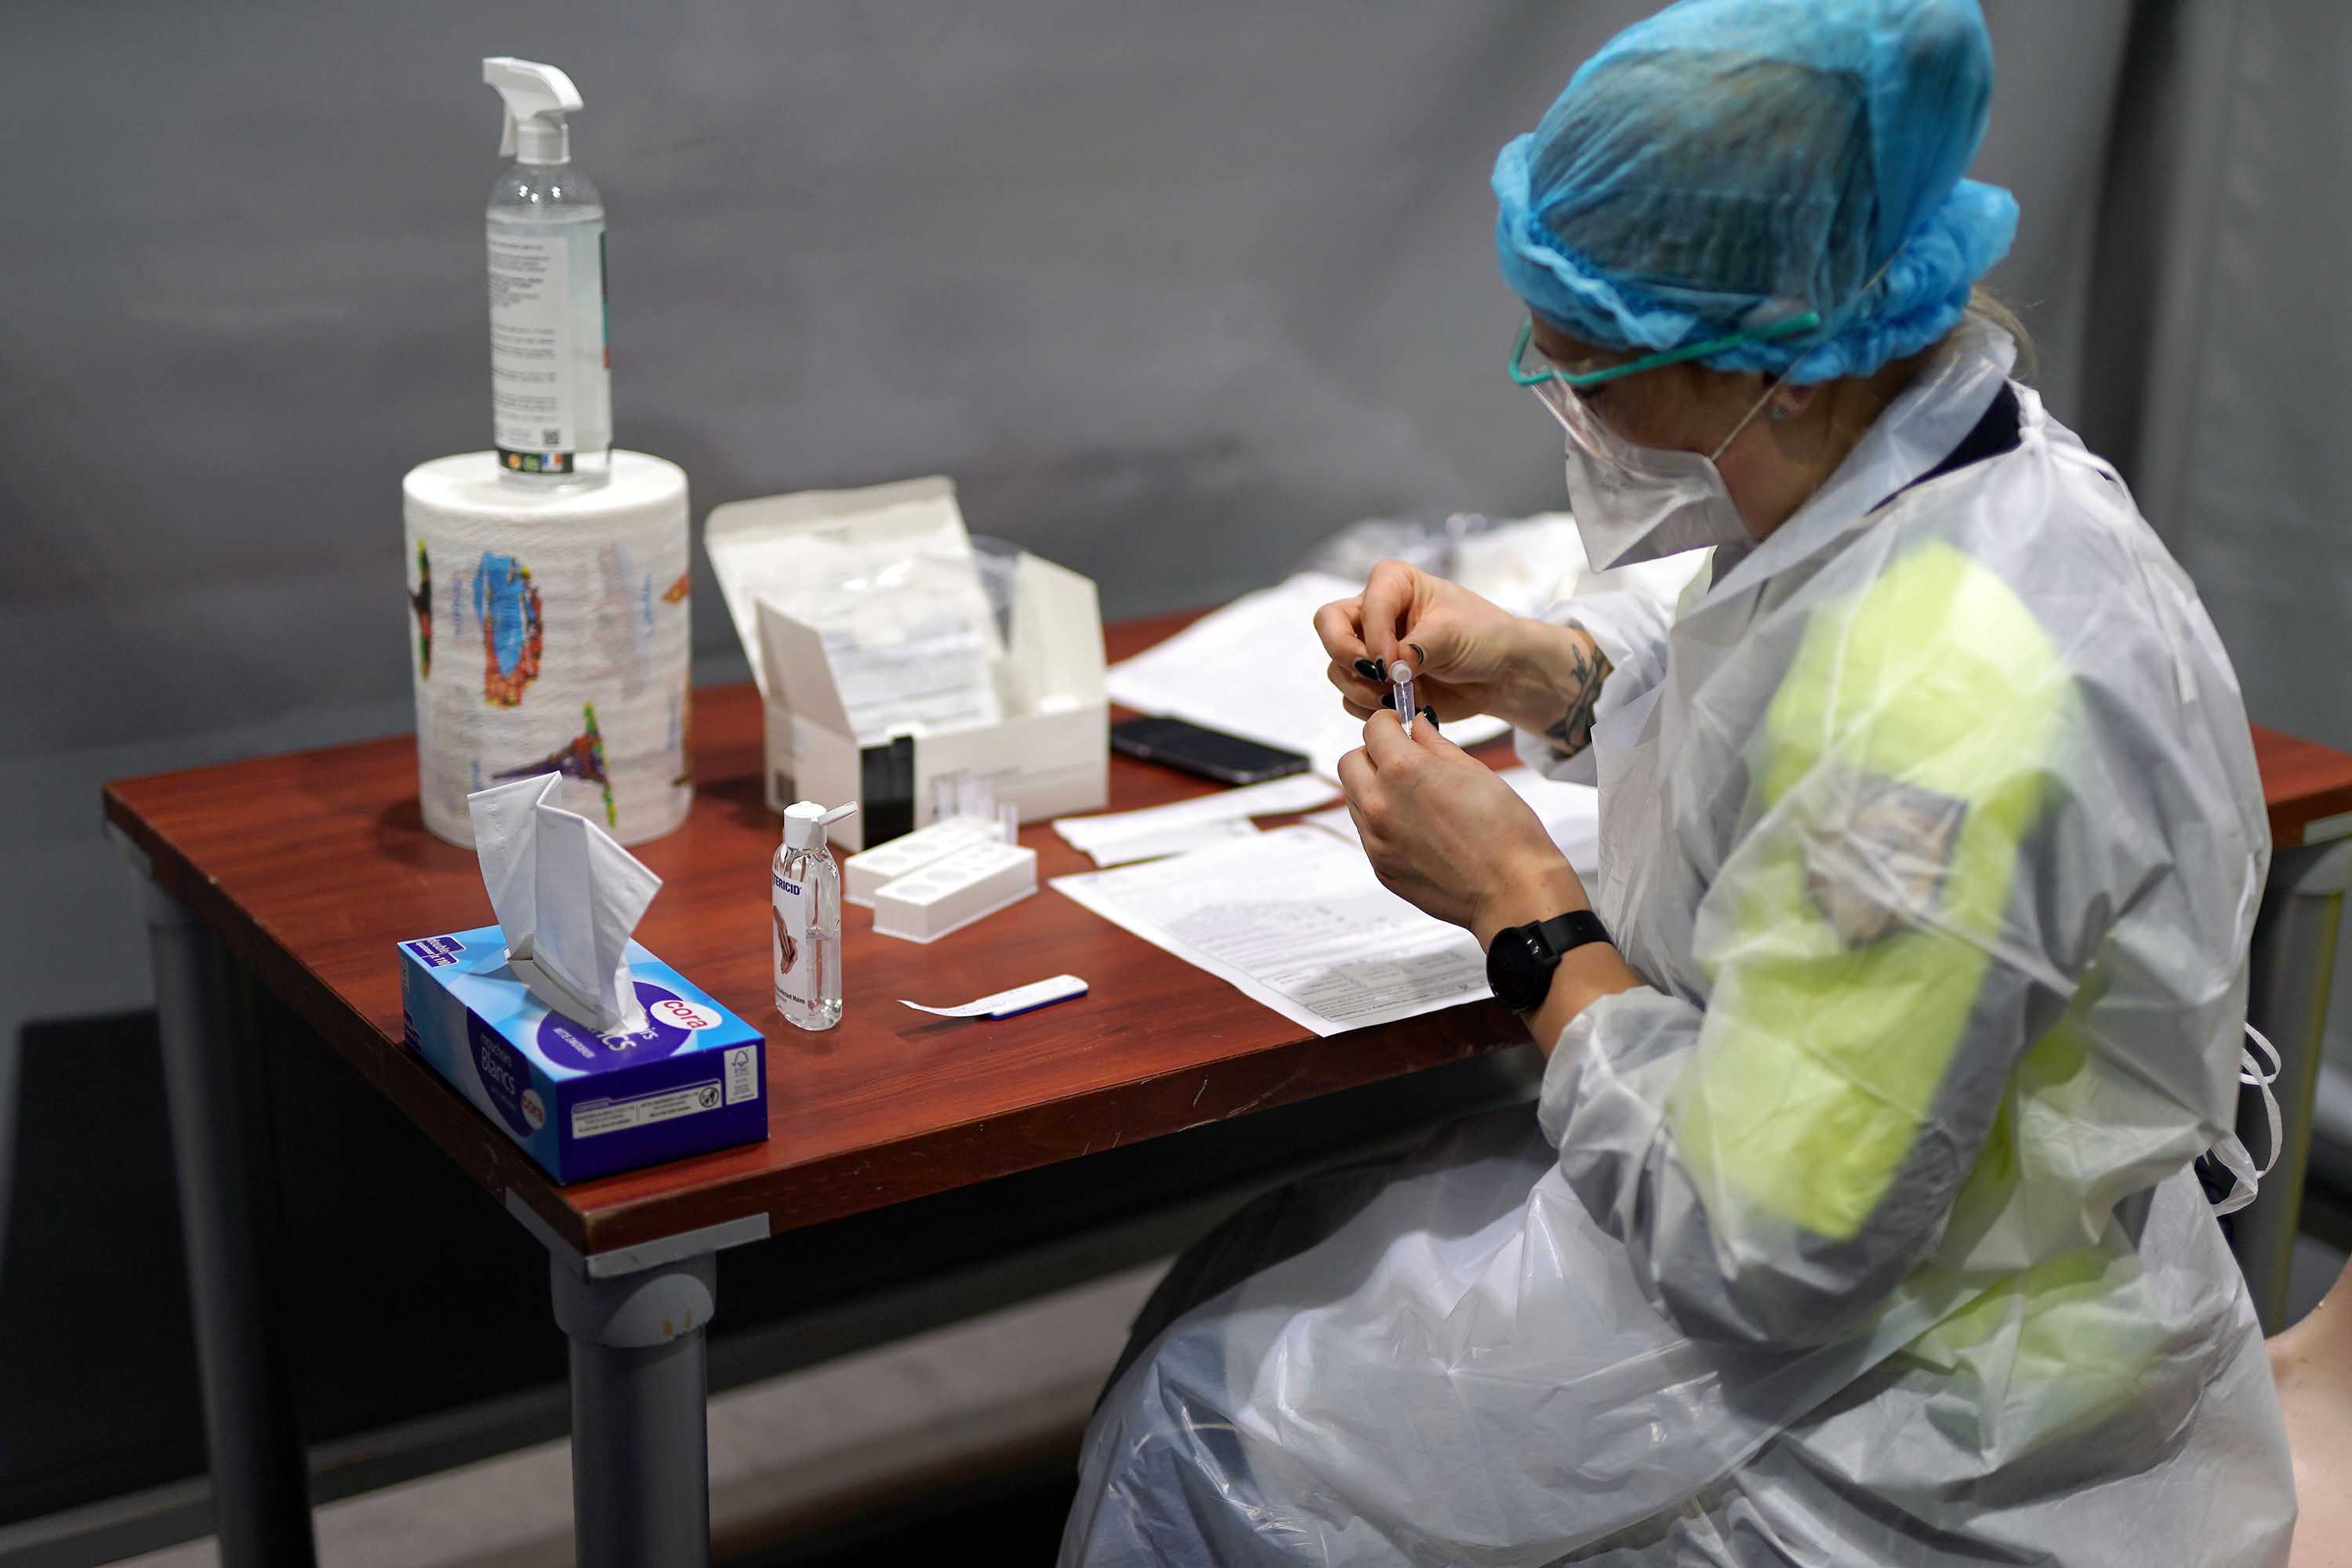 A medical worker handles a test tube after administering a nasal swab to a patient at a coronavirus testing center, on February 18, in Dunkirk, France, where the UK variant has been detected. 